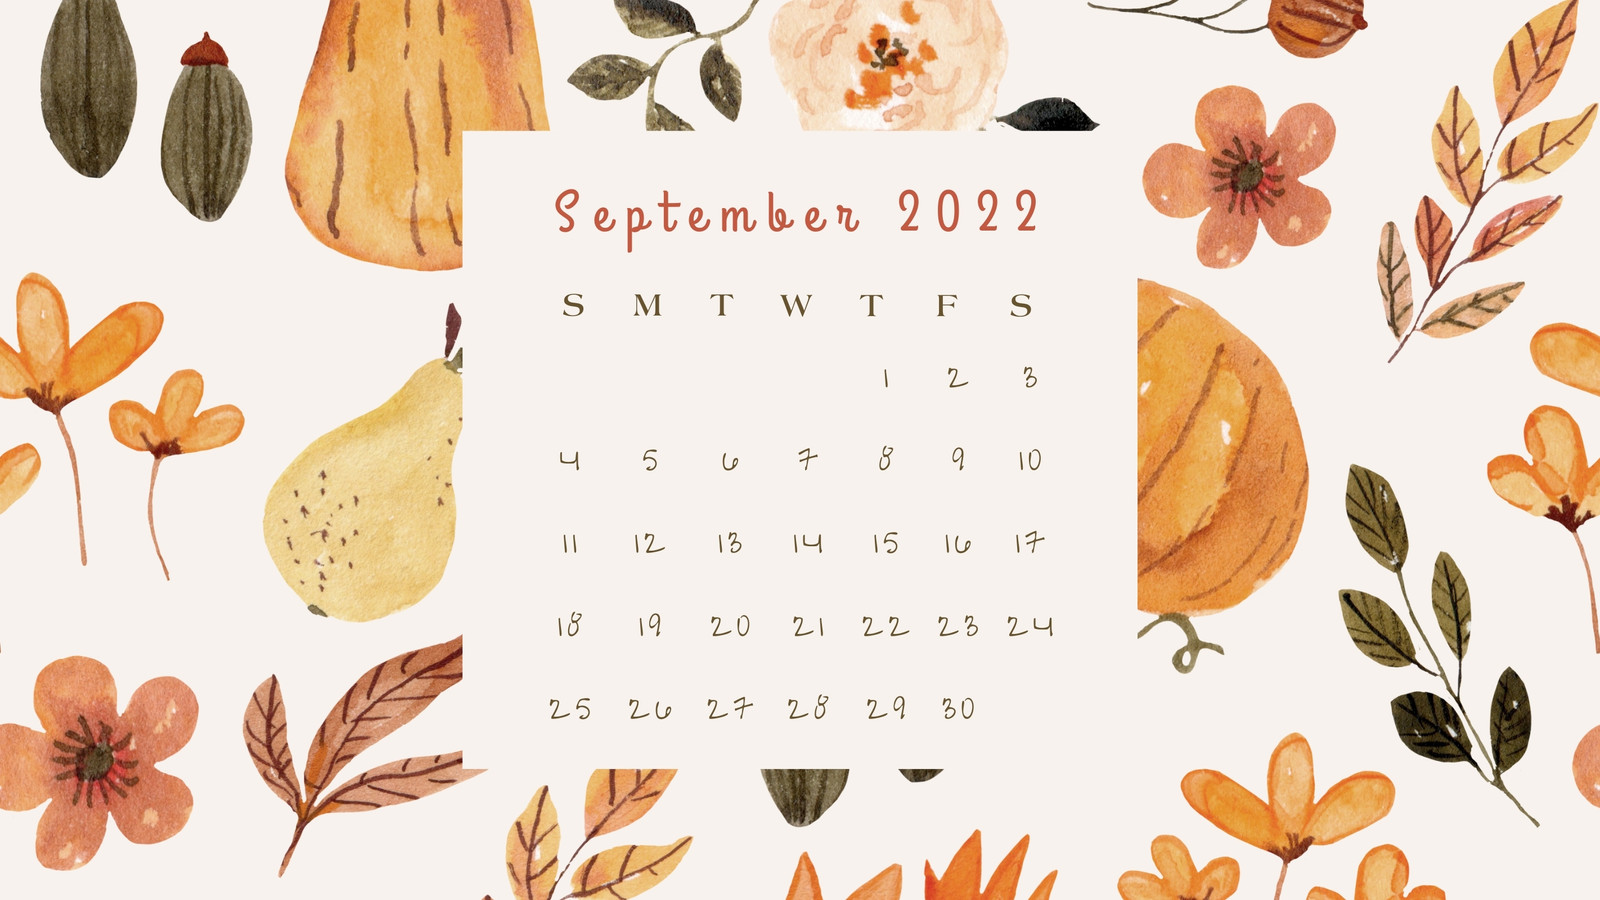 fall background pictures for computer